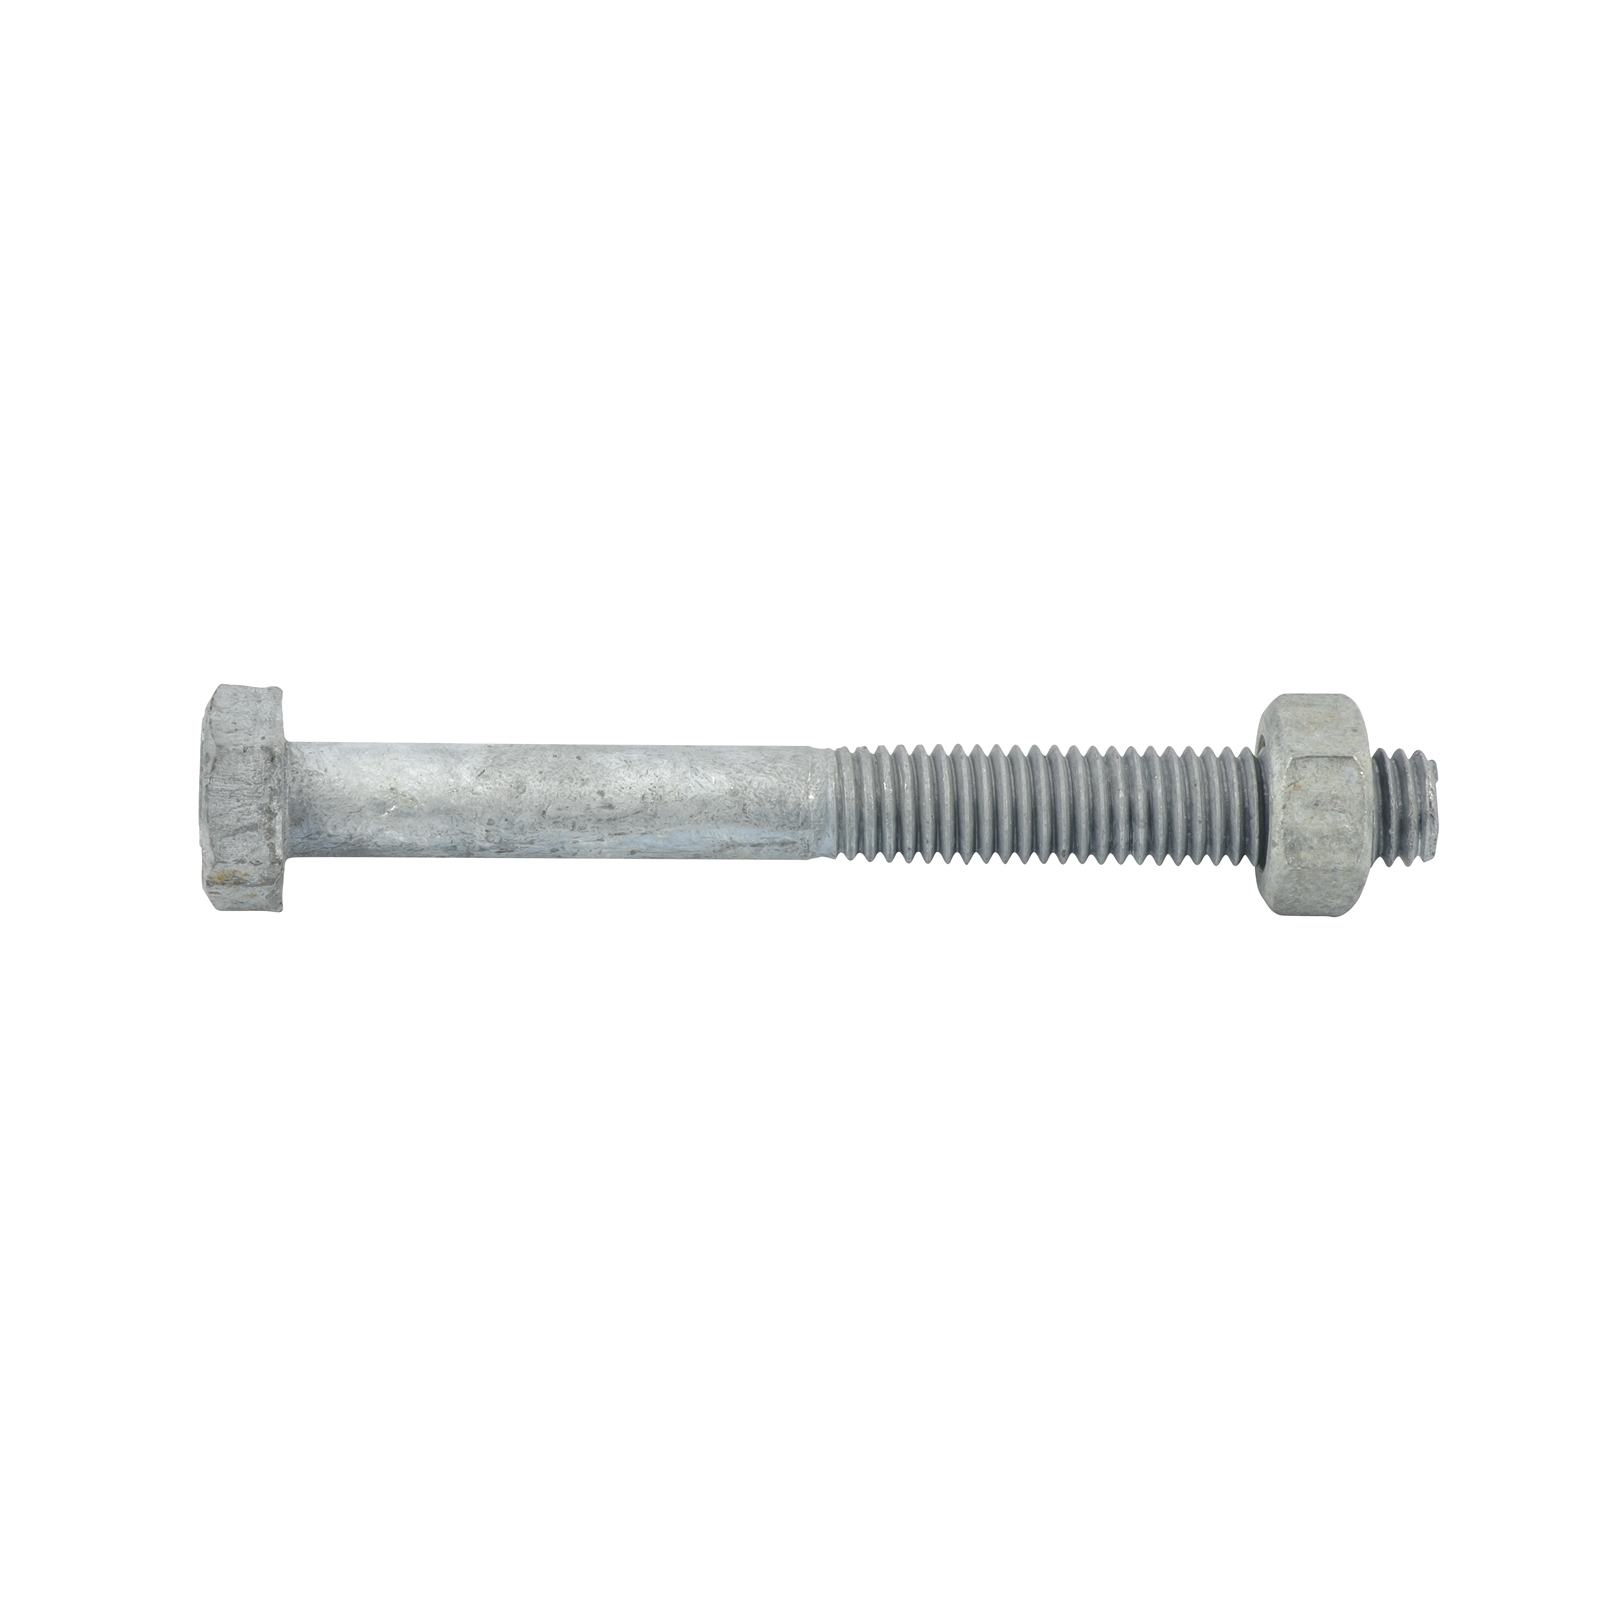 Zenith M8 x 75mm Galvanised Hex Head Bolt and Nut